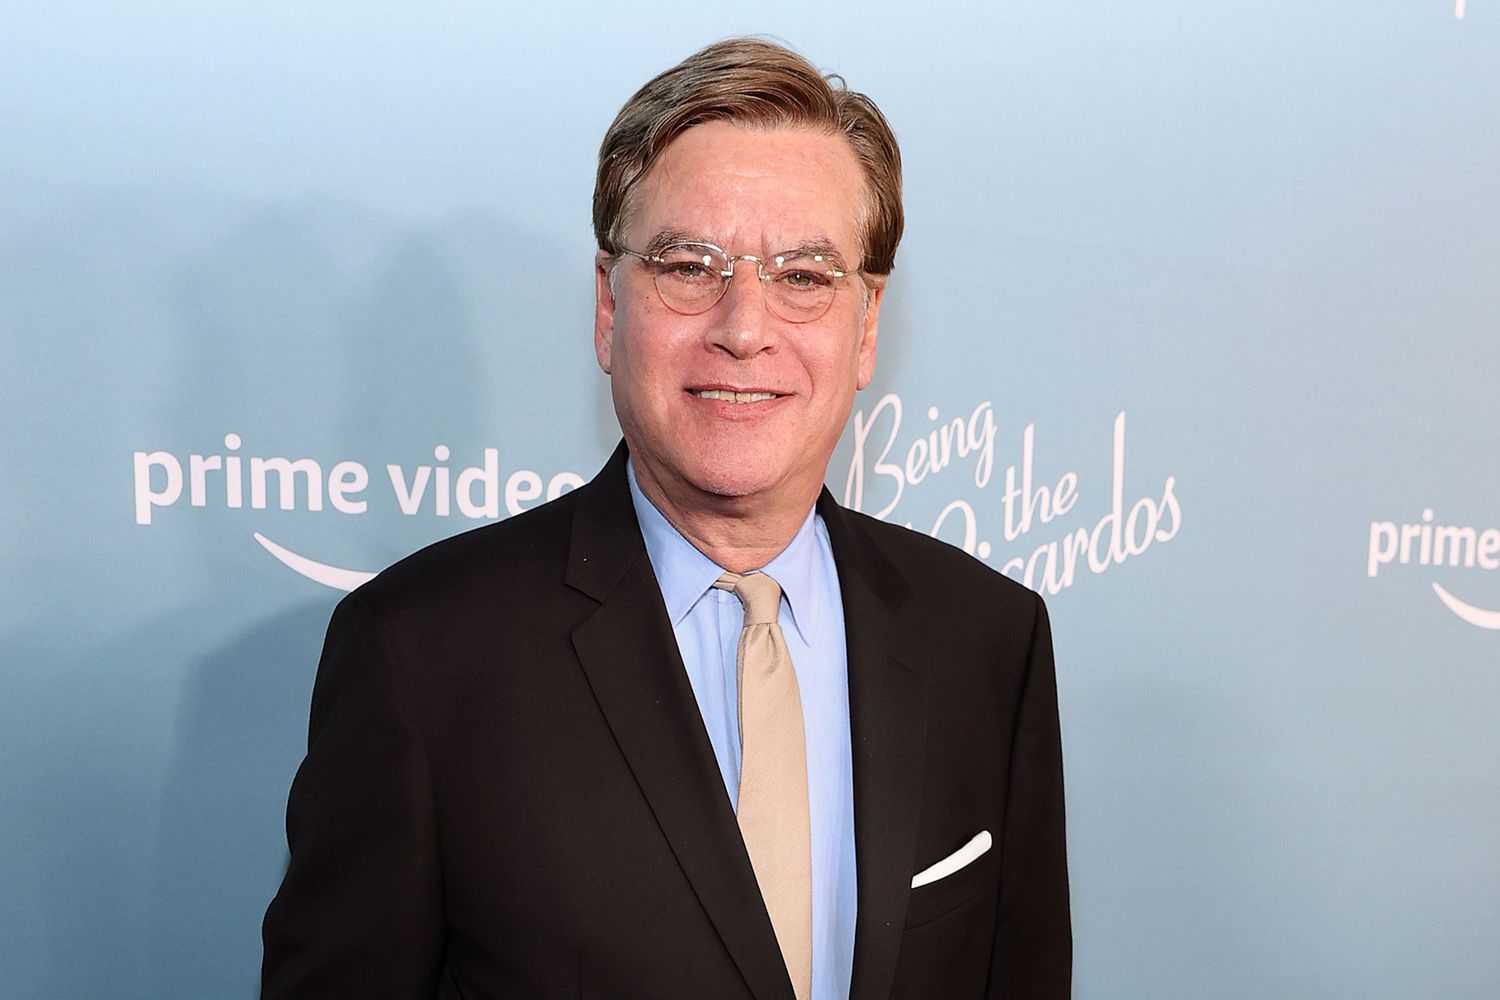 Aaron Sorkin attends the premiere of Amazon Studios' 'Being The Ricardos' at Academy Museum of Motion Pictures on December 06, 2021, in Los Angeles, California.